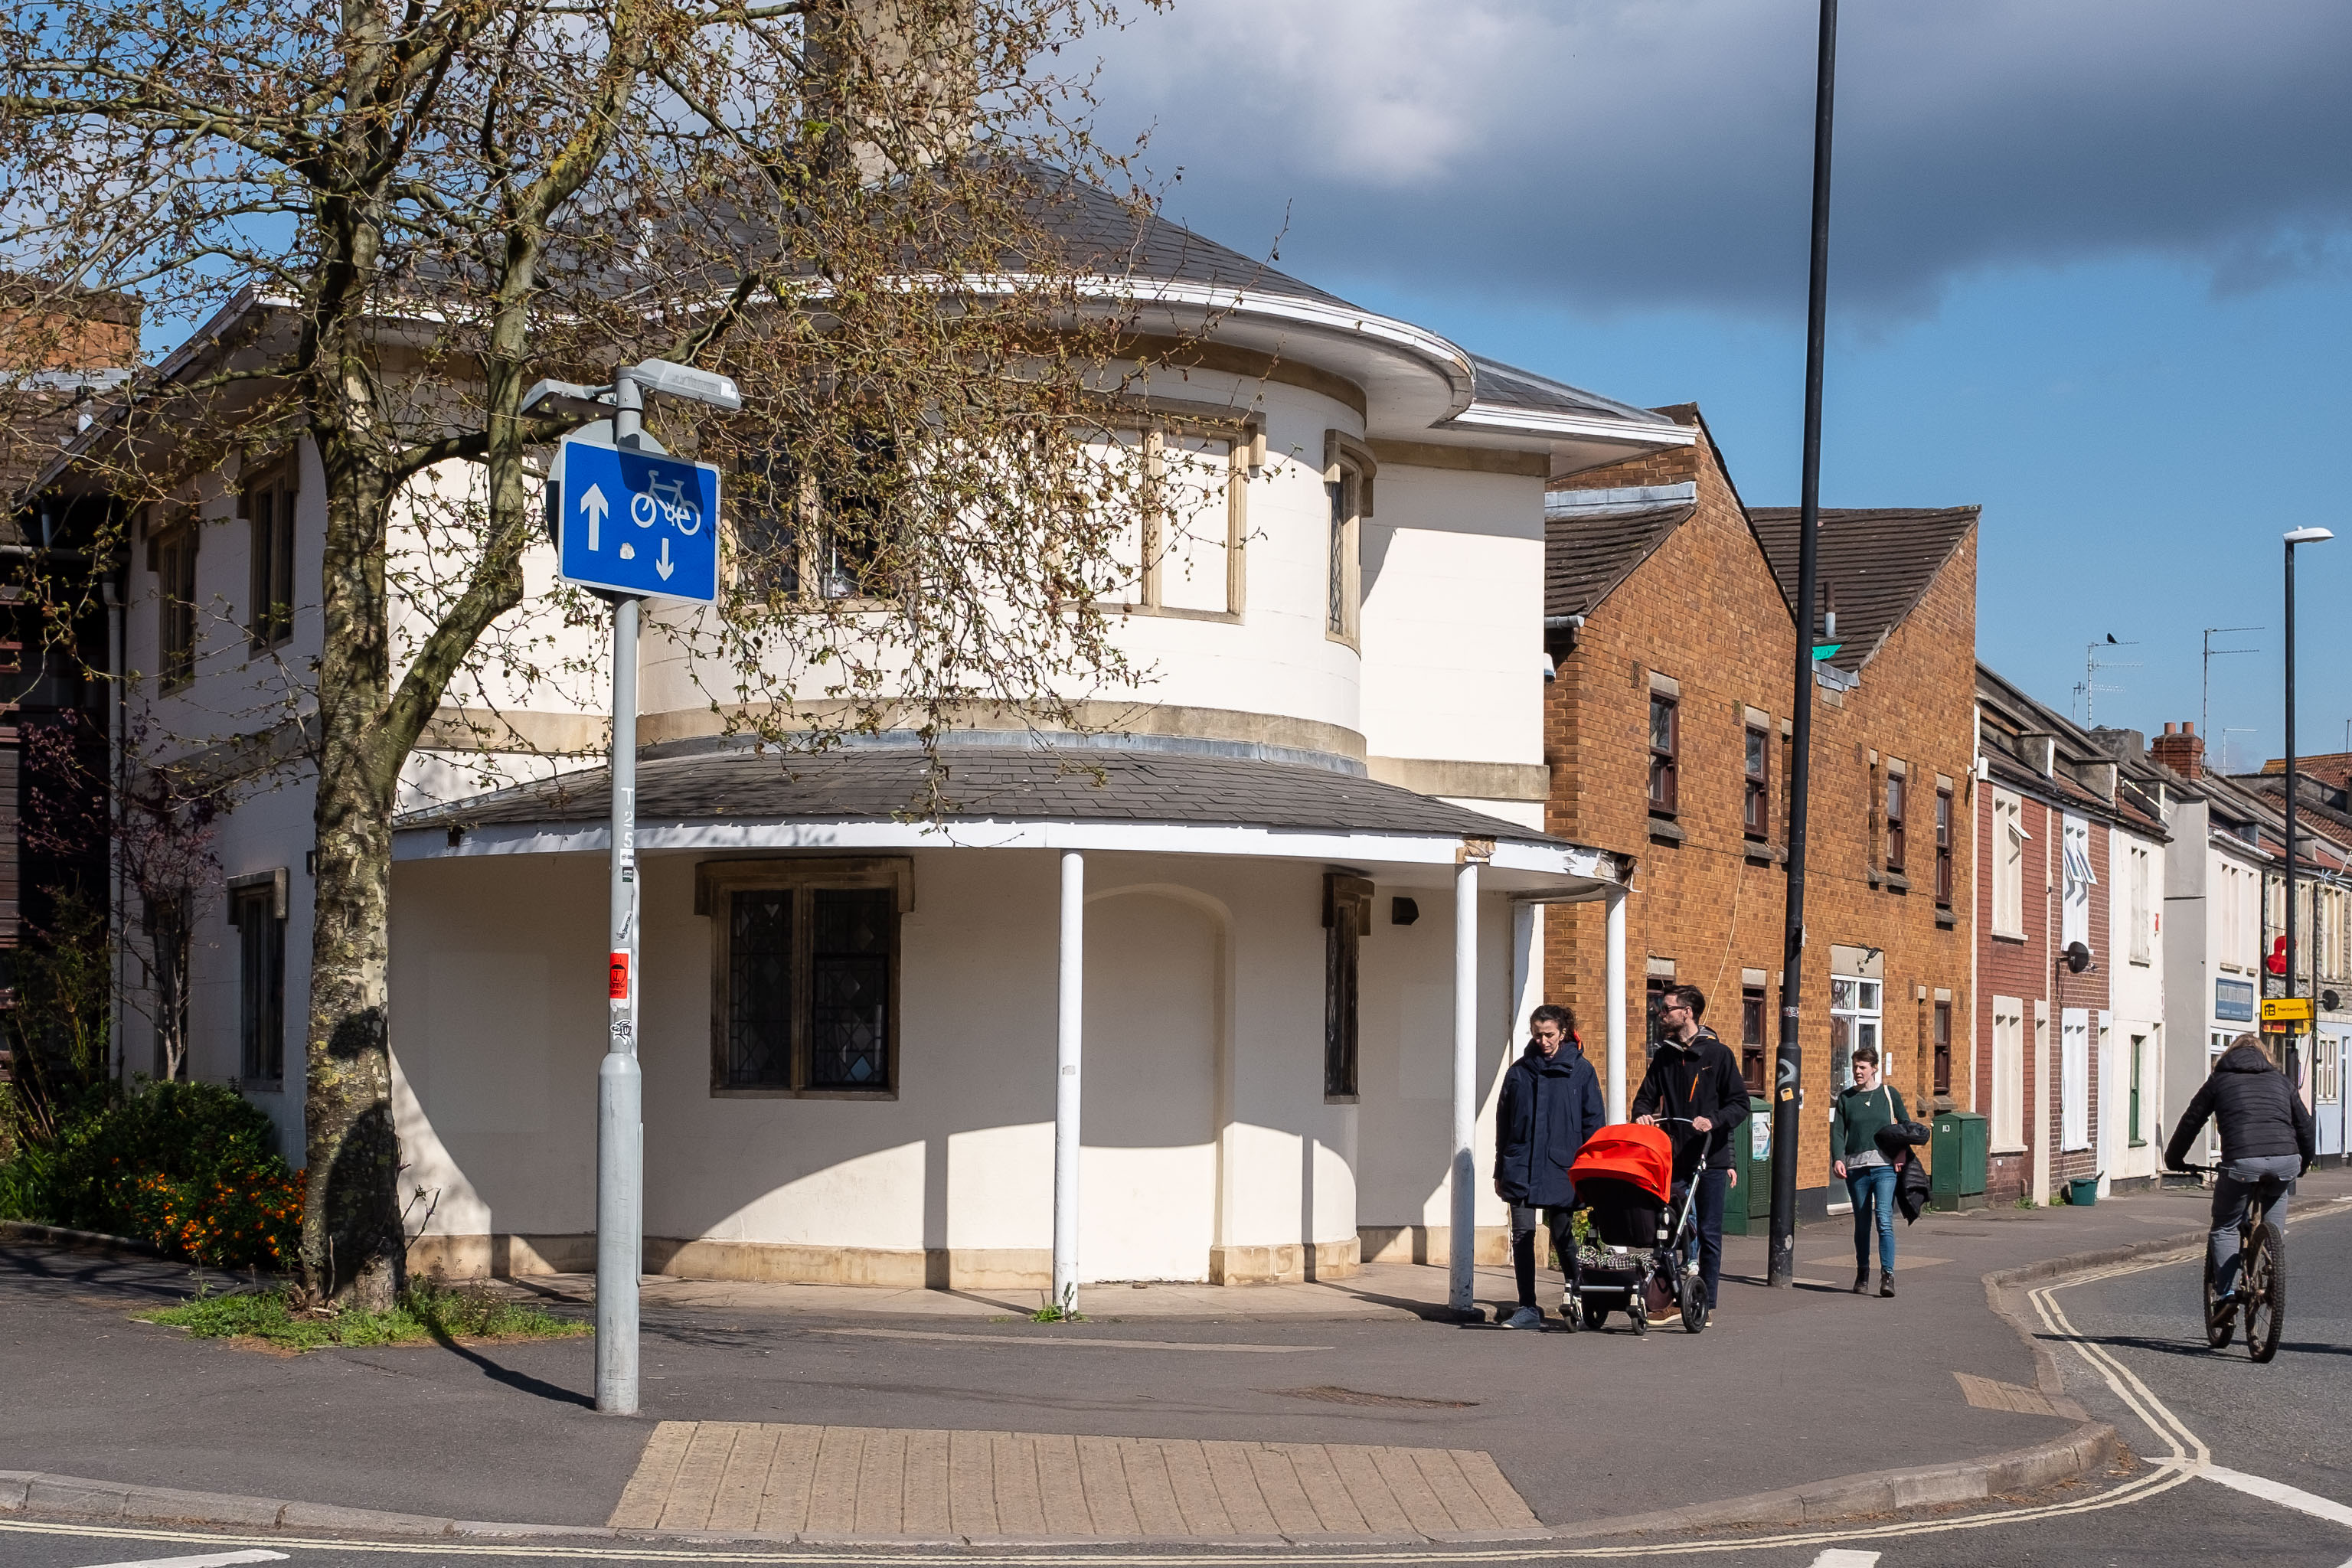 Toll House
The reason Ashton Gate is called Ashon Gate is because it's the site of the former turnpike gate between Bristol and Ashton (now known as Long Asht...